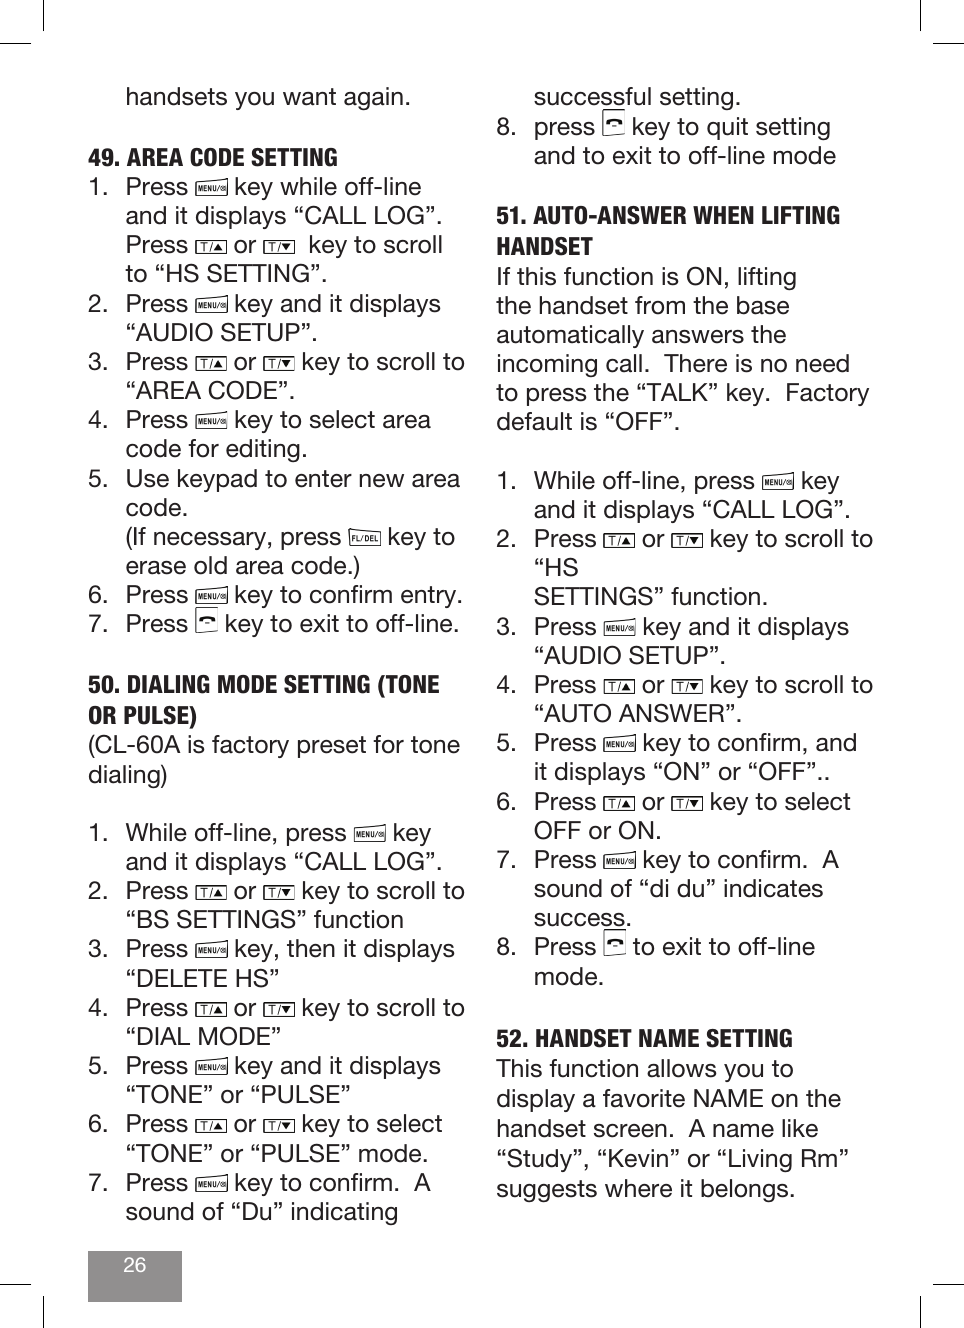 26handsets you want again.49. AREA CODE SETTING1. Press   key while off-line and it displays “CALL LOG”. Press   or    key to scroll to “HS SETTING”.2. Press   key and it displays “AUDIO SETUP”. 3. Press   or   key to scroll to “AREA CODE”. 4. Press   key to select area code for editing.5.  Use keypad to enter new area code.       (If necessary, press   key to erase old area code.)6. Press   key to conrm entry. 7. Press   key to exit to off-line.50. DIALING MODE SETTING (TONE OR PULSE)(CL-60A is factory preset for tone dialing)1.  While off-line, press   key and it displays “CALL LOG”.2. Press   or   key to scroll to “BS SETTINGS” function3. Press   key, then it displays “DELETE HS”4. Press   or   key to scroll to “DIAL MODE”5. Press   key and it displays “TONE” or “PULSE”6. Press   or   key to select “TONE” or “PULSE” mode.7. Press   key to conrm.  A sound of “Du” indicating successful setting.8. press   key to quit setting and to exit to off-line mode51. AUTO-ANSWER WHEN LIFTING HANDSETIf this function is ON, lifting the handset from the base automatically answers the incoming call.  There is no need to press the “TALK” key.  Factory default is “OFF”.1.  While off-line, press   key and it displays “CALL LOG”.2. Press   or   key to scroll to “HS   SETTINGS” function.3. Press   key and it displays “AUDIO SETUP”.4. Press   or   key to scroll to “AUTO ANSWER”.5. Press   key to conrm, and it displays “ON” or “OFF”..6. Press   or   key to select OFF or ON. 7. Press   key to conrm.  A sound of “di du” indicates success.8. Press   to exit to off-line mode.52. HANDSET NAME SETTINGThis function allows you to display a favorite NAME on the handset screen.  A name like “Study”, “Kevin” or “Living Rm” suggests where it belongs.